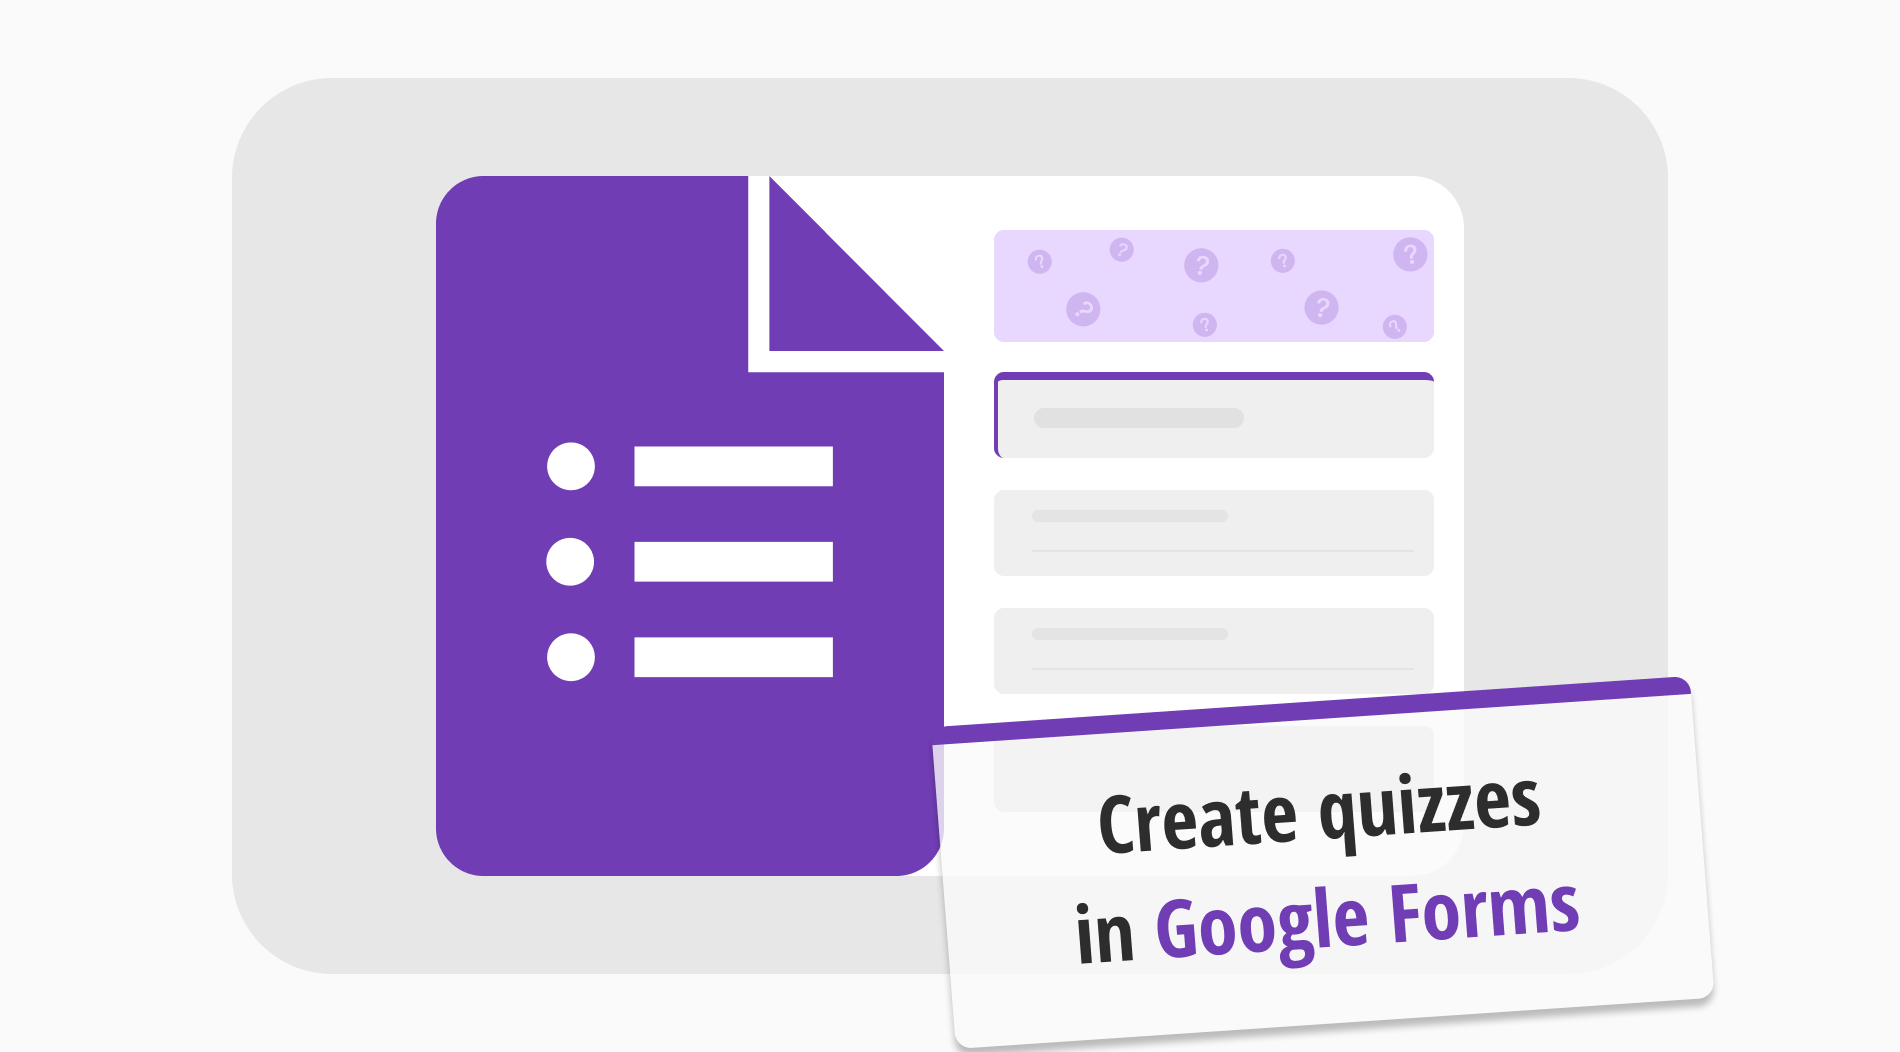 How to create quizzes in Google Forms (Steps, tips & more)